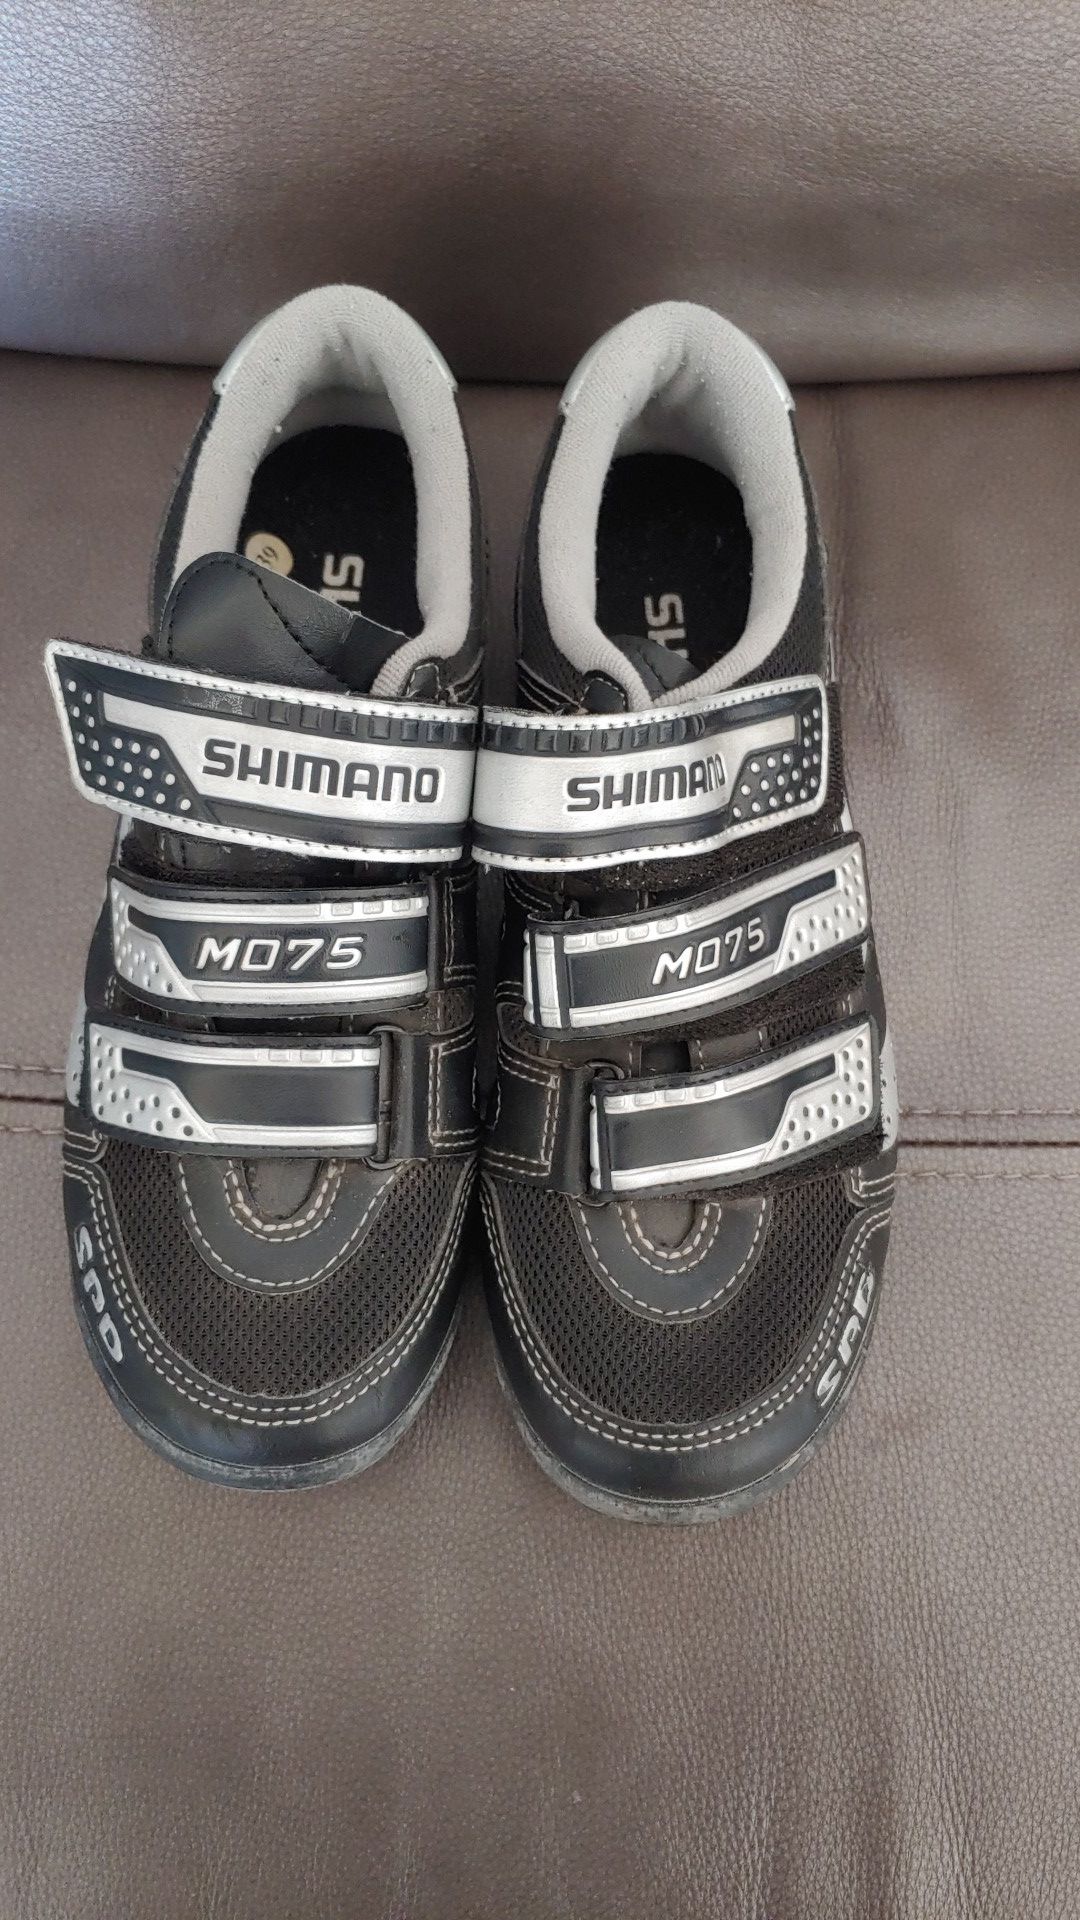 Used women's Shimano cycling shoes Size 5.8 US